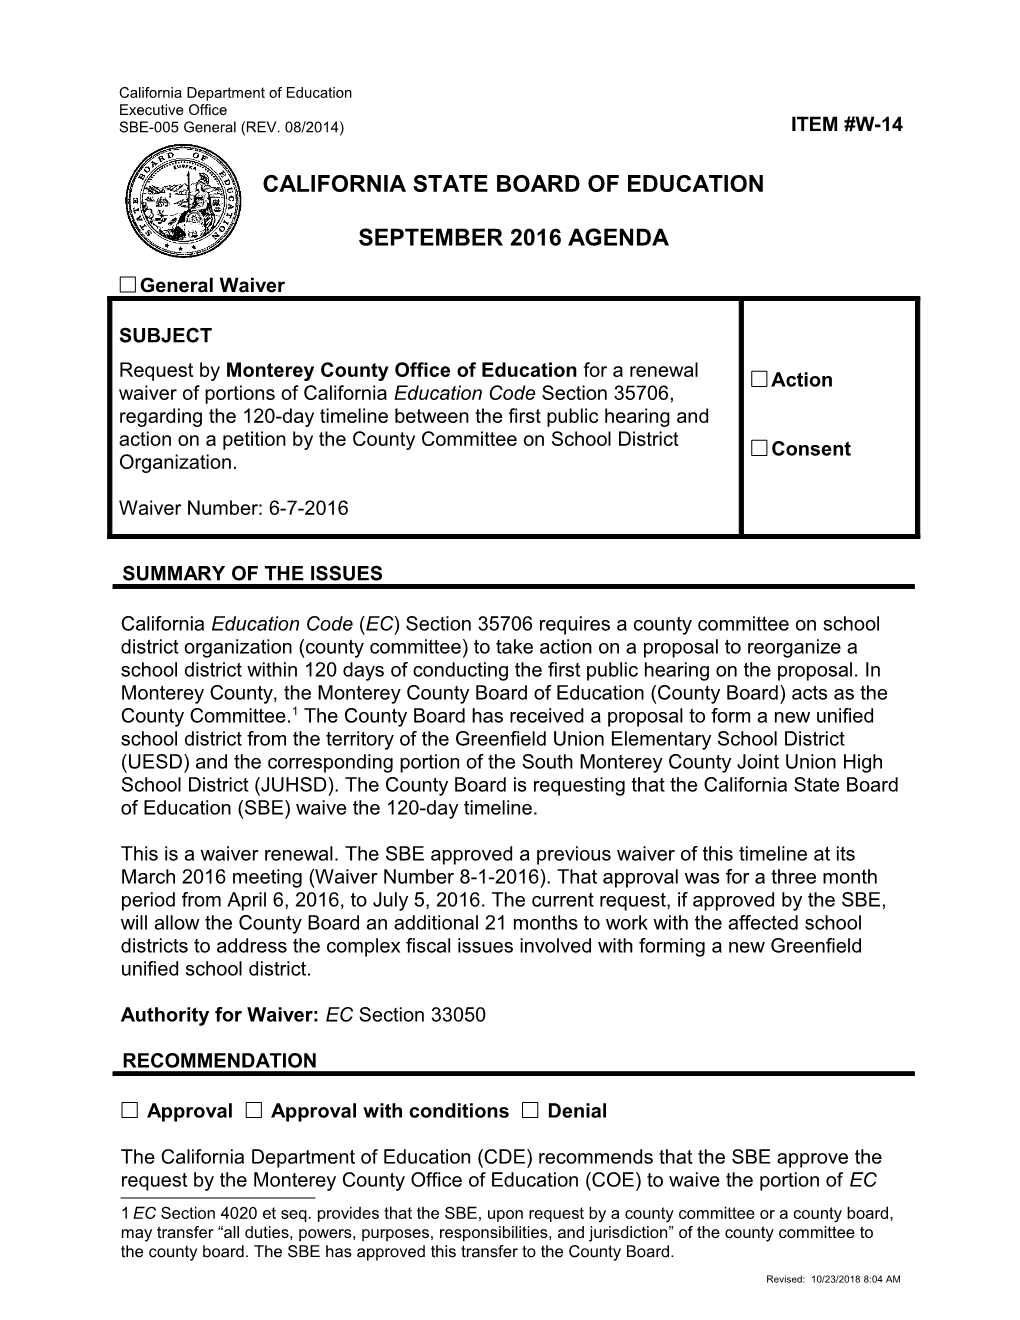 September 2016 Waiver Item W-14 - Meeting Agendas (CA State Board of Education)